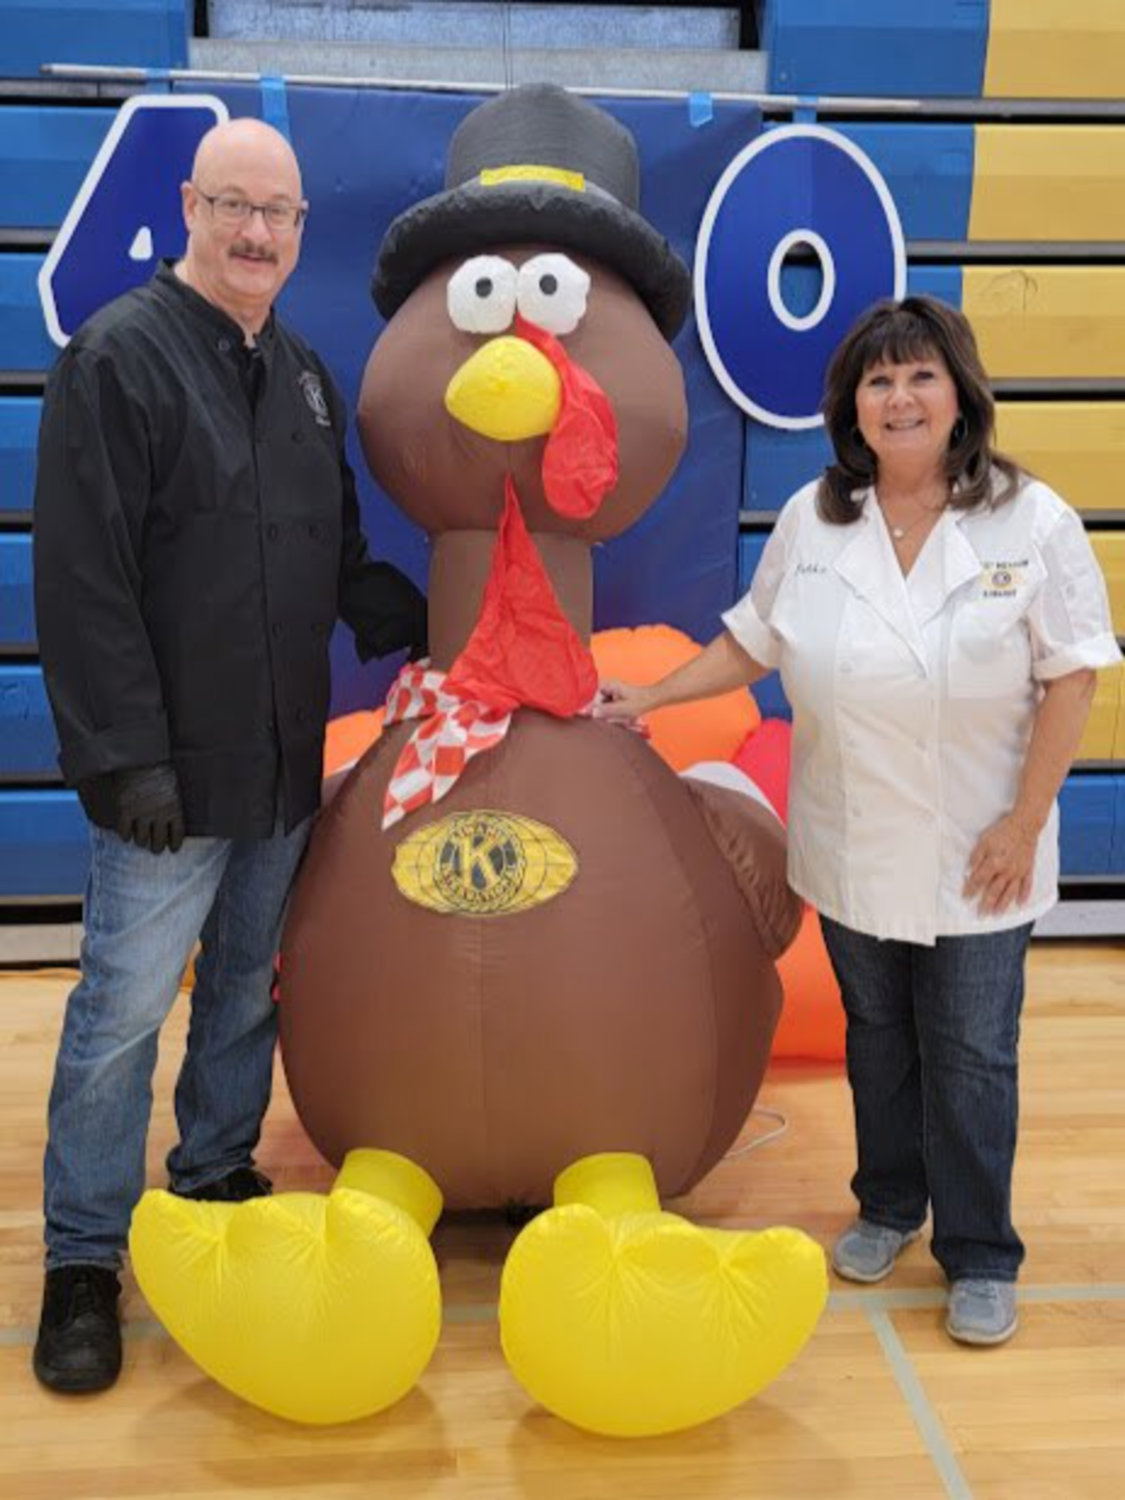 Mitchell Allen and Debra Kirsh co-chaired the annual Thanksgiving dinner.